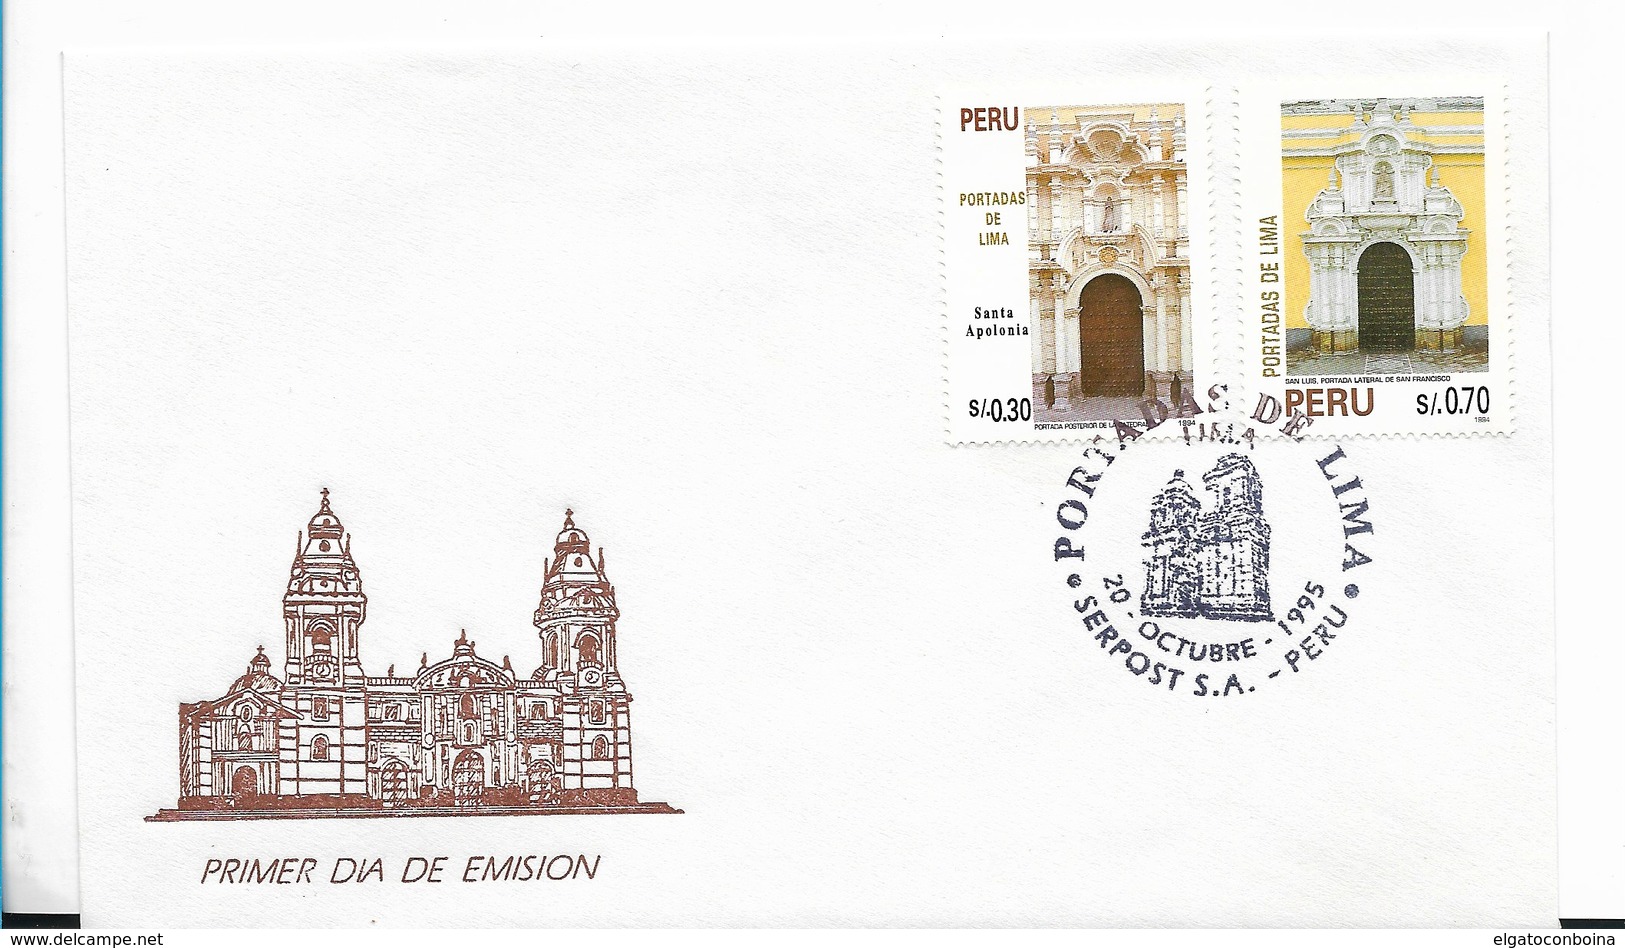 PERU 1995 Lima Cathedrals Architecture Buildings FDC First Day Cover Scott 1119-20 - Perú